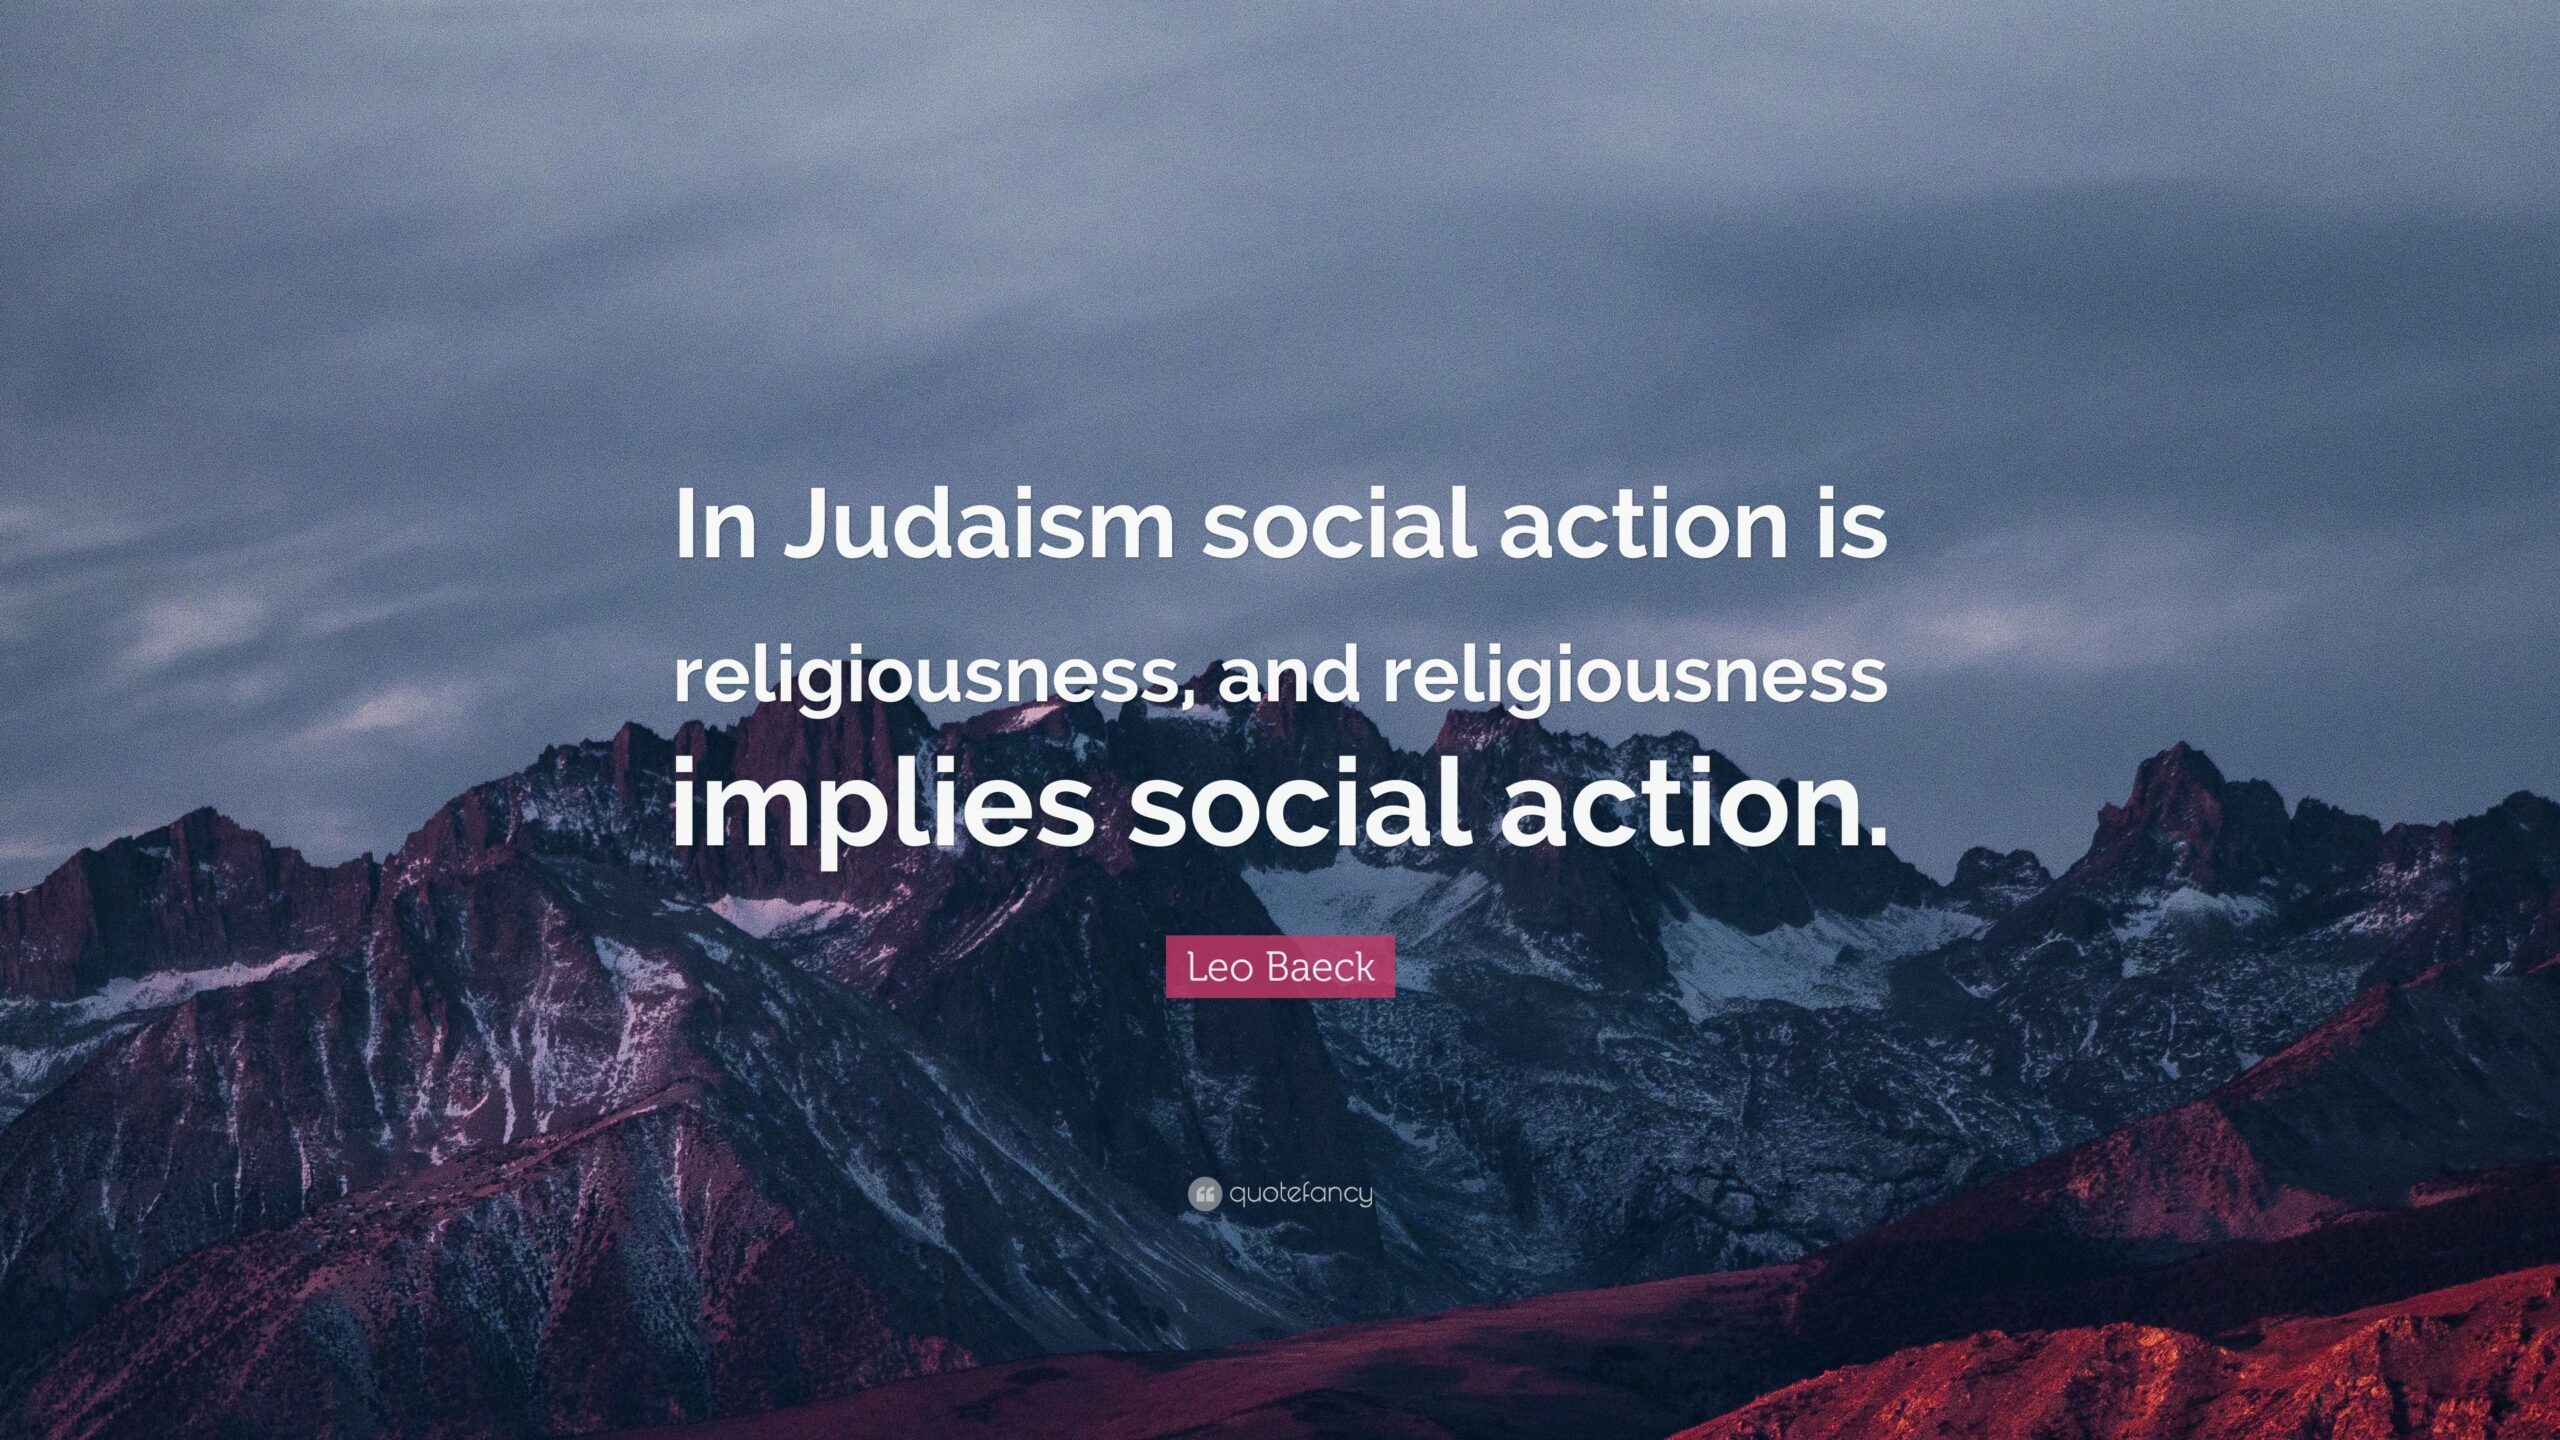 Leo Baeck Quote: “In Judaism social action is religiousness, and